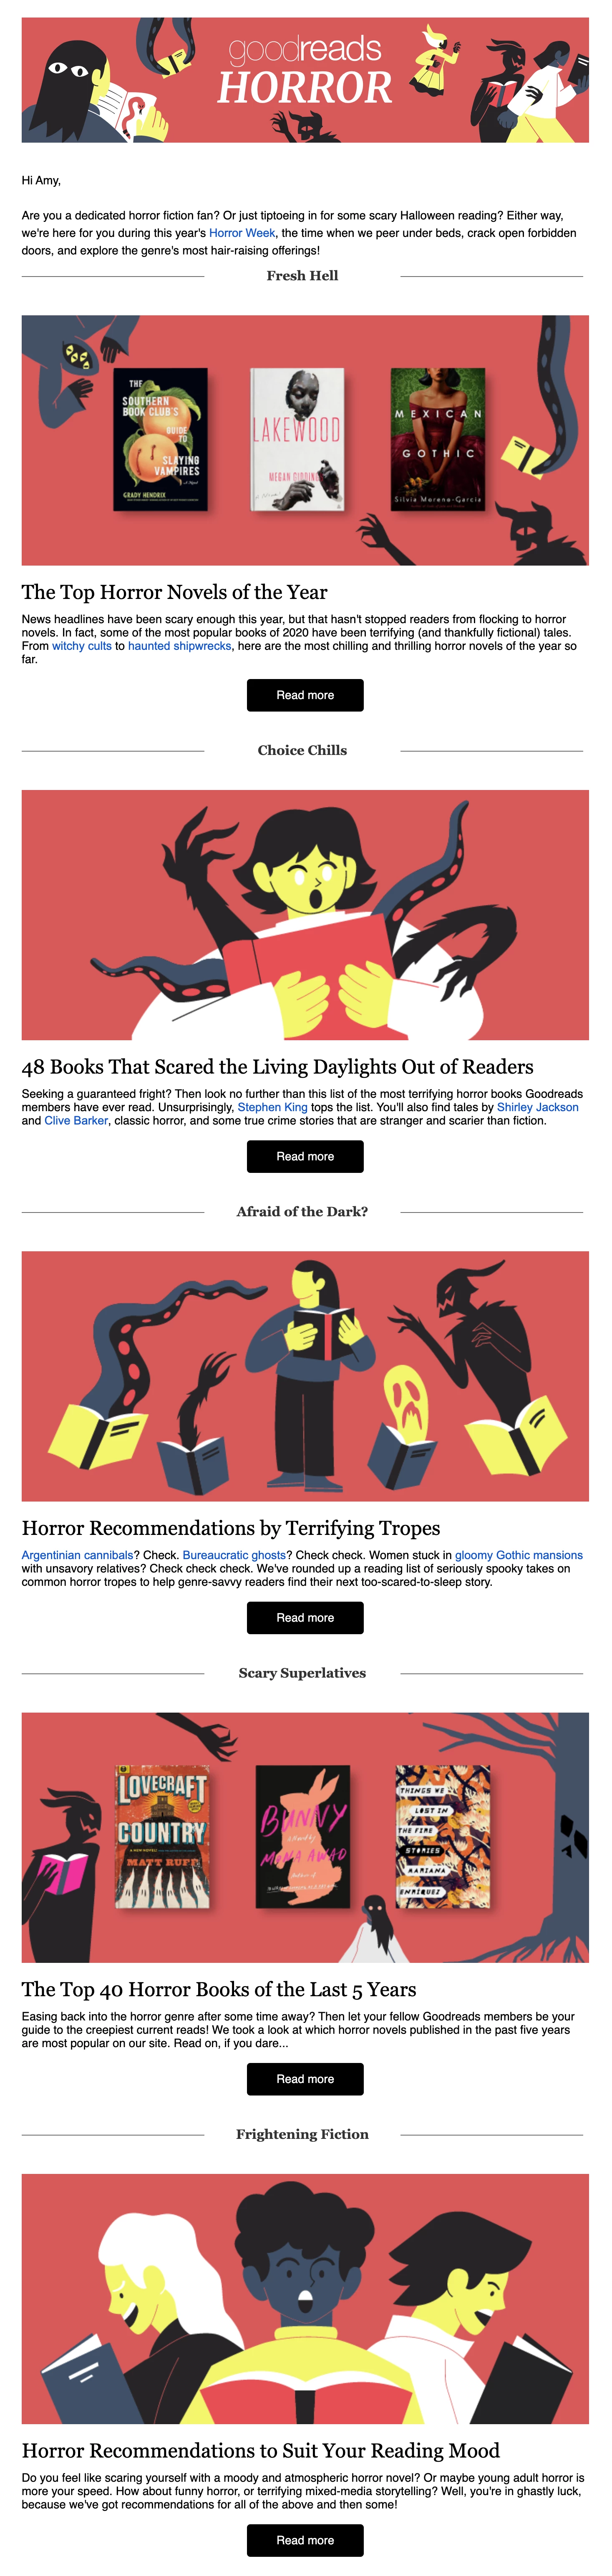 goodreads halloween email with suggestions for horror books and authors